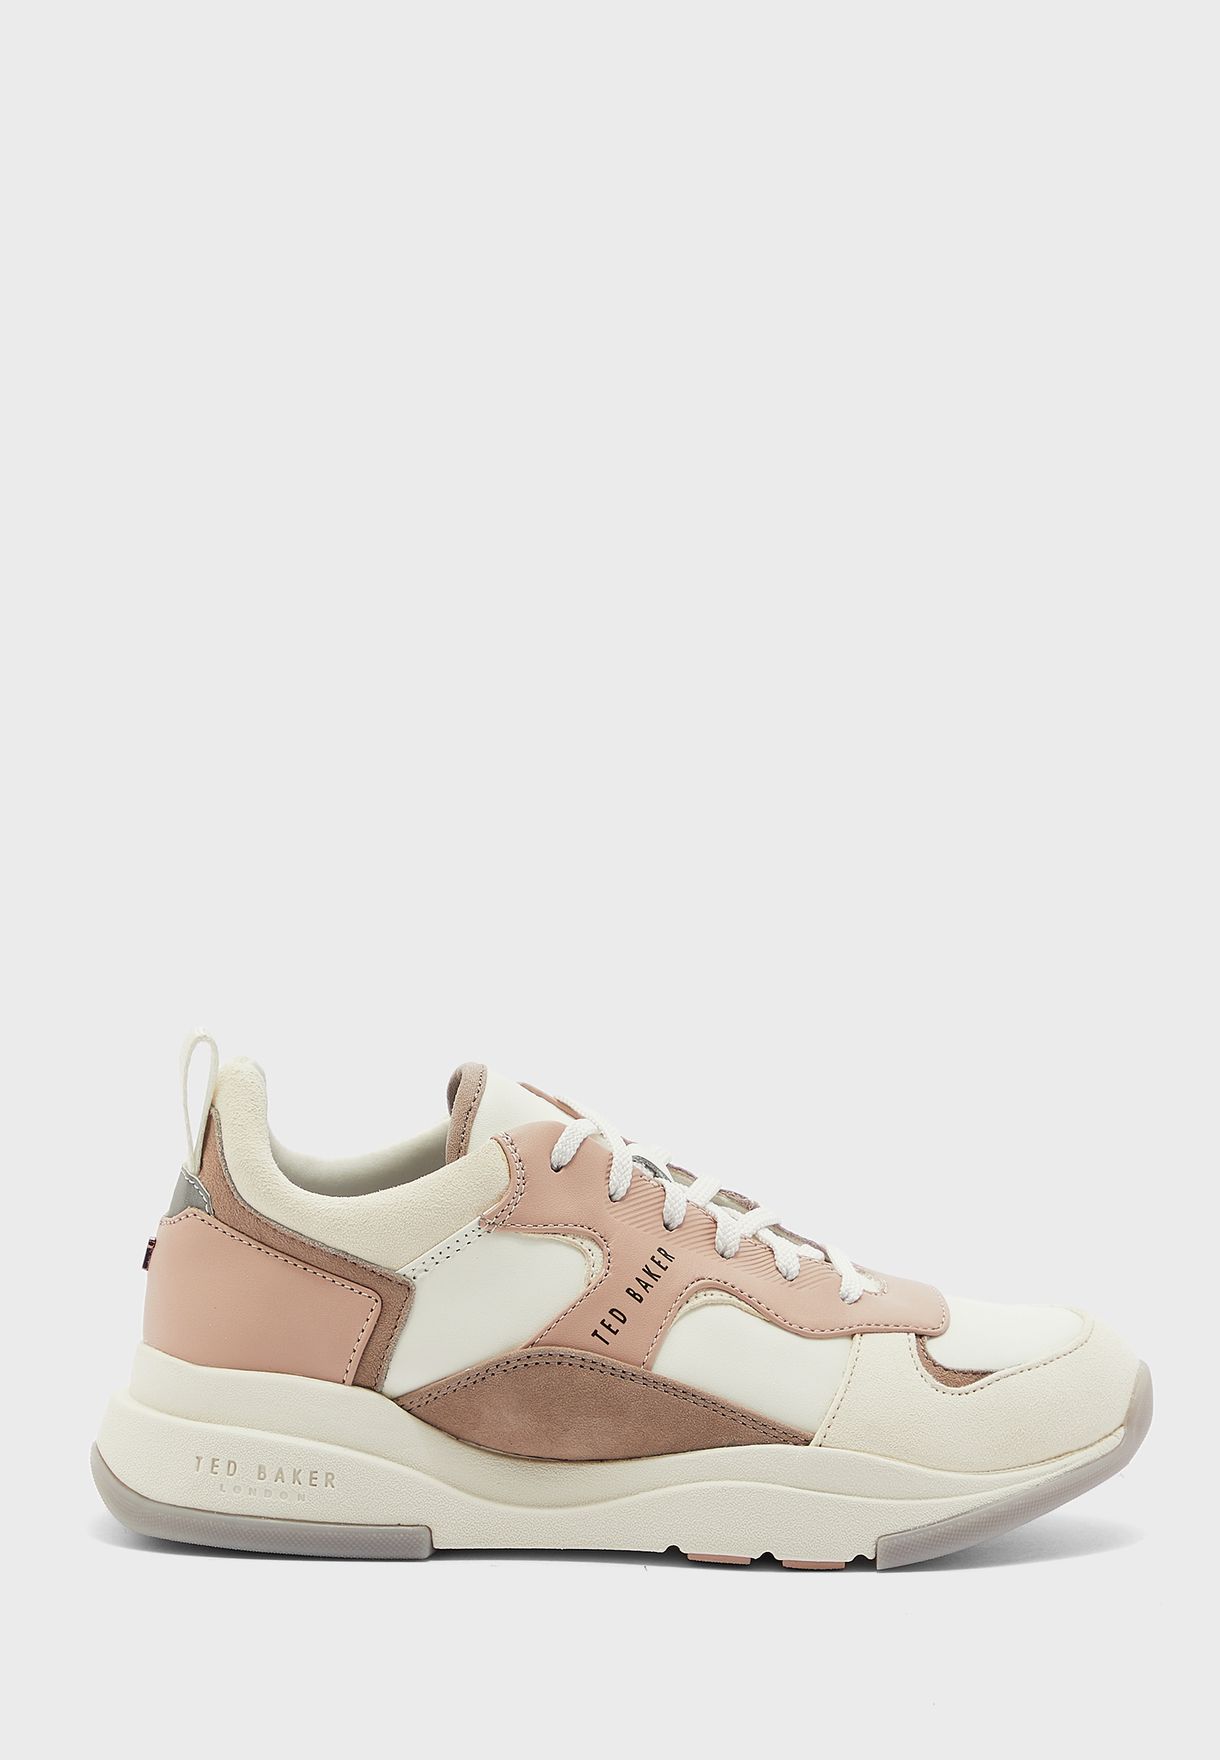 ted baker khaki trainers